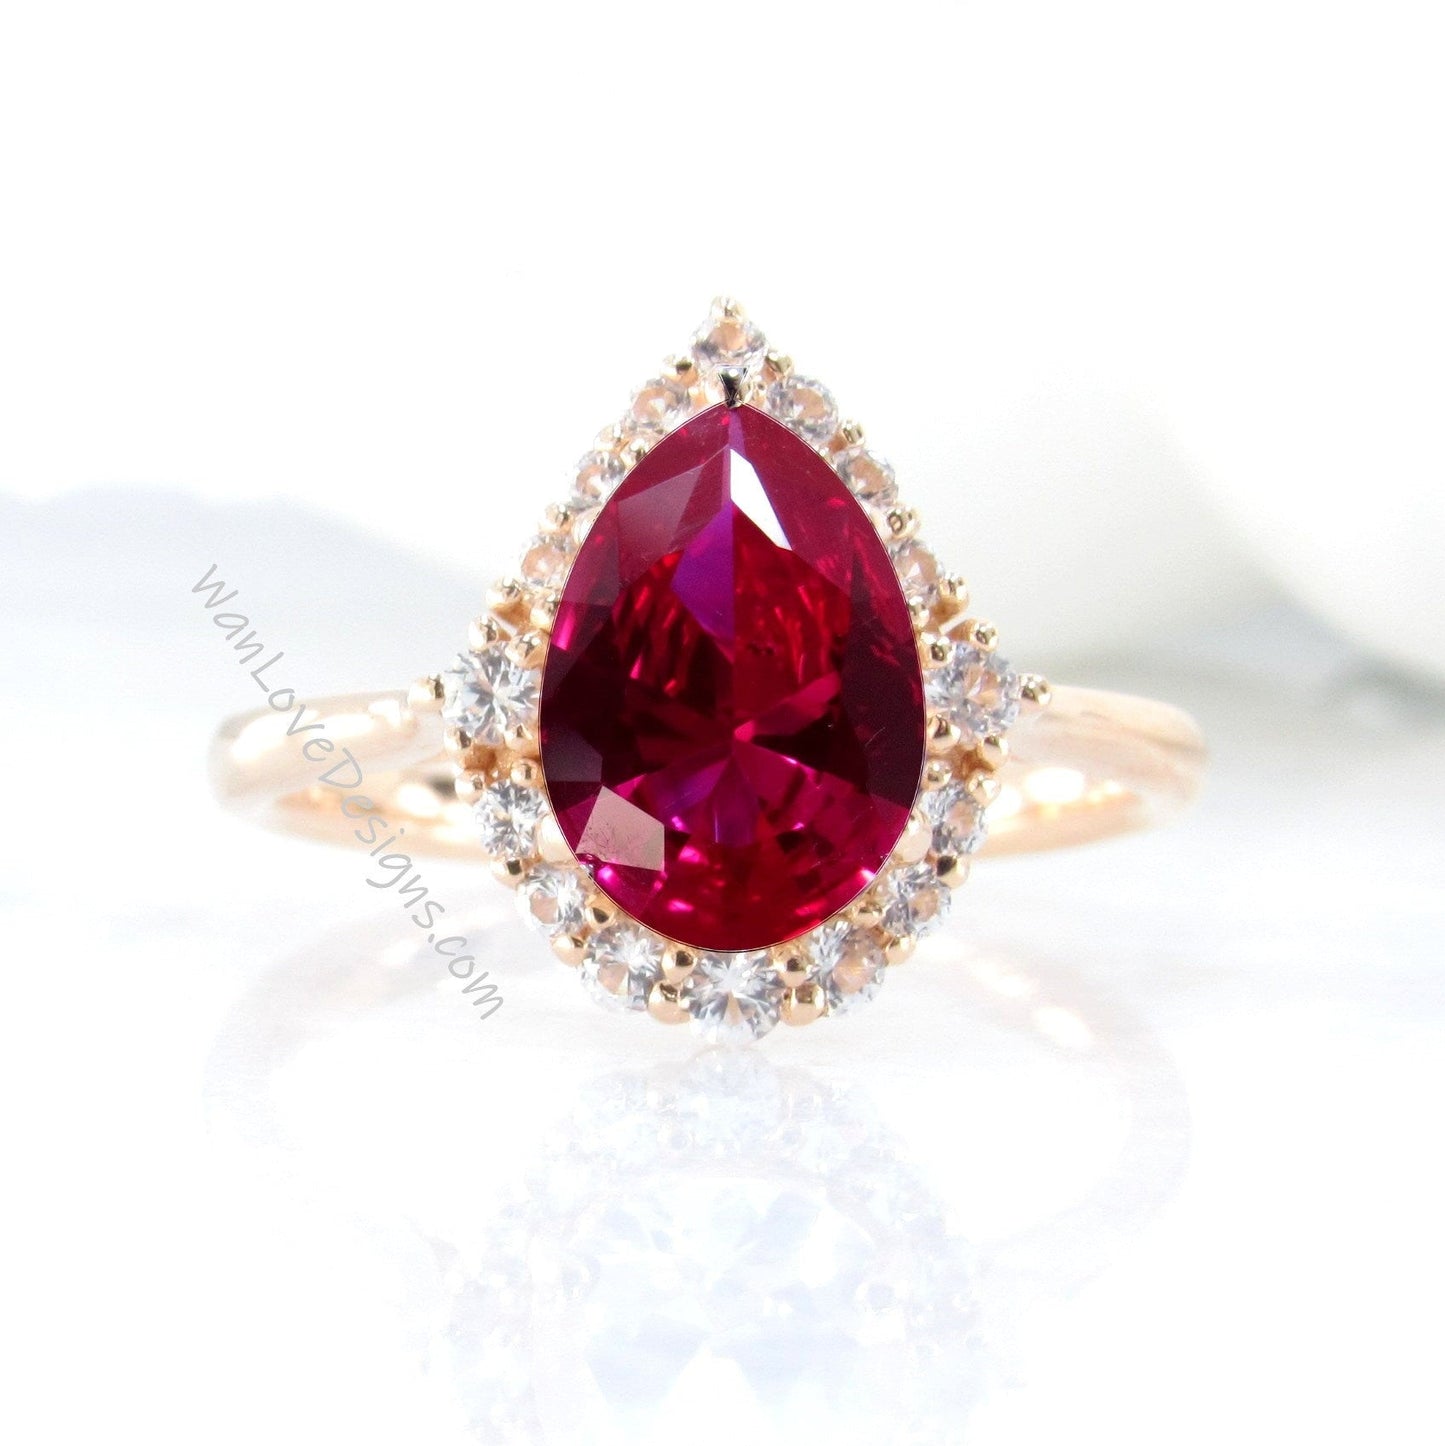 Pear cut Ruby engagement ring rose gold vintage tapered diamond graduated halo bridal ring antique wedding promise anniversary ring Wan Love Designs